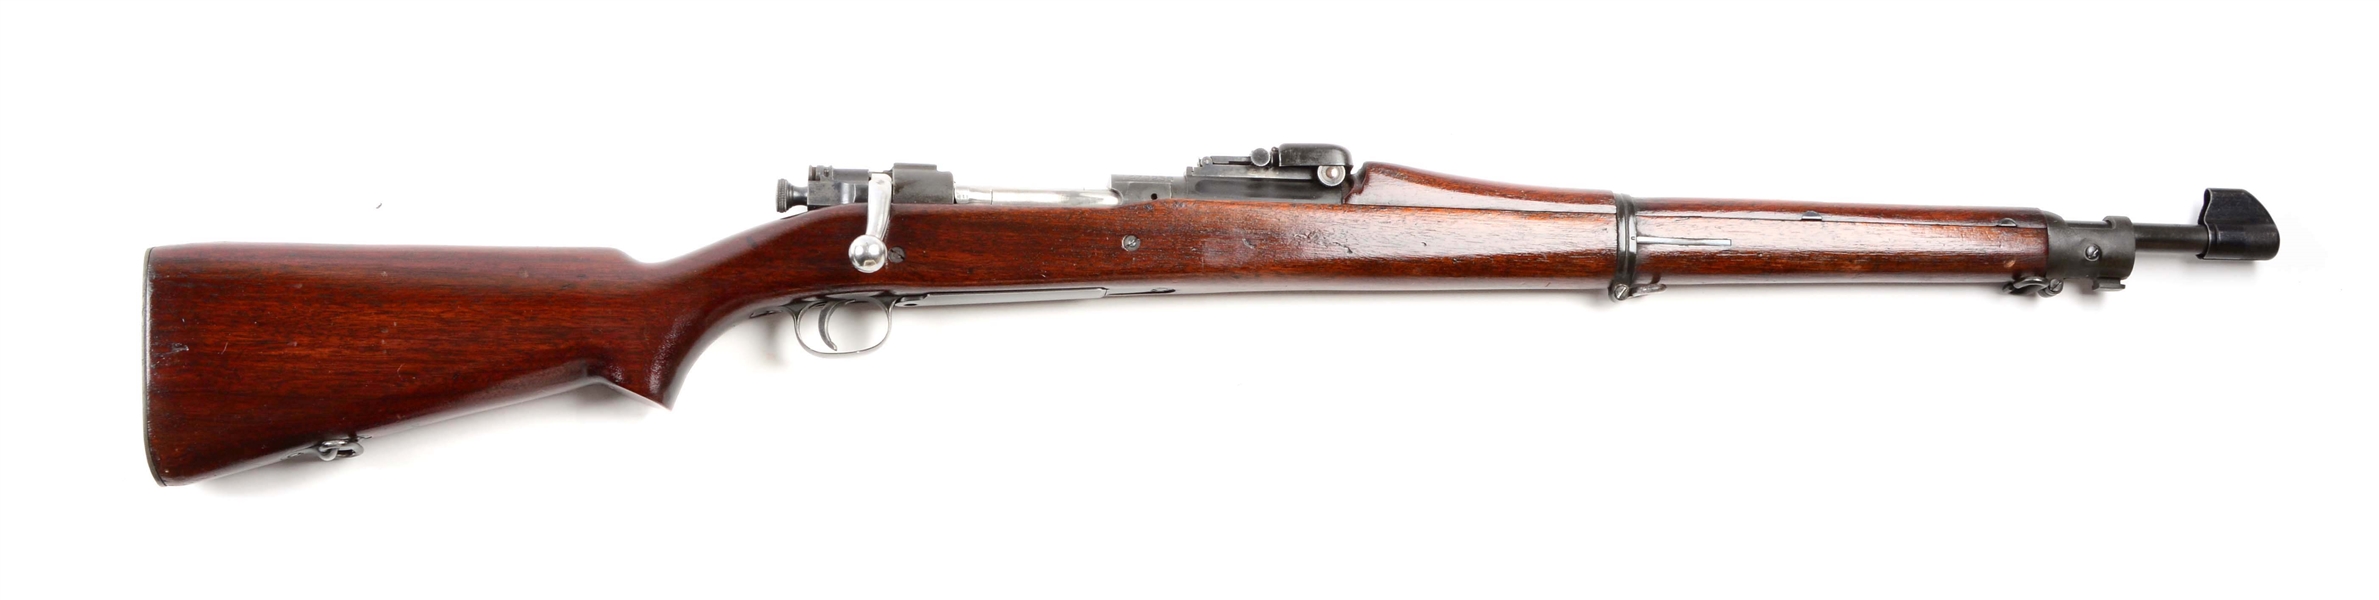 (C) DOCUMENTED U.S. SPRINGFIELD MODEL 1903 NATIONAL MATCH BOLT ACTION RIFLE.